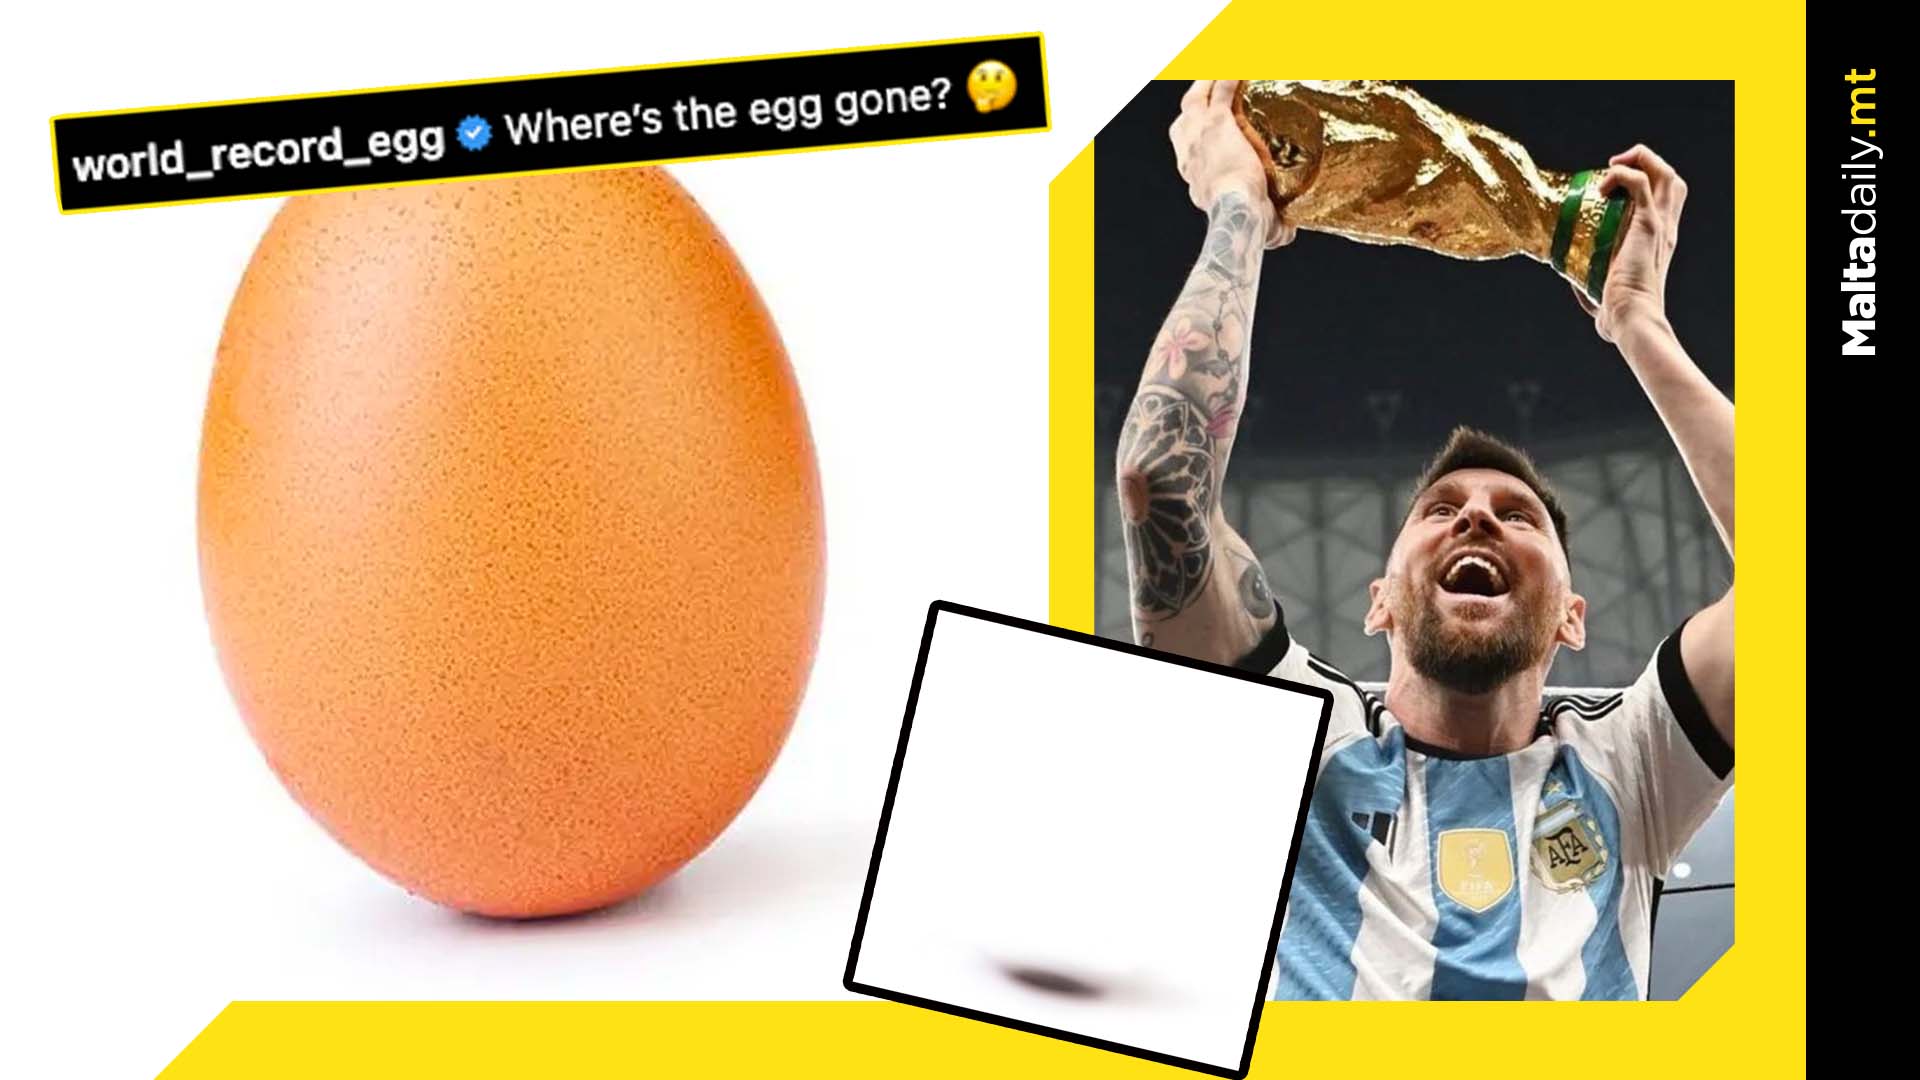 World record egg photo replaced by blank shadow image